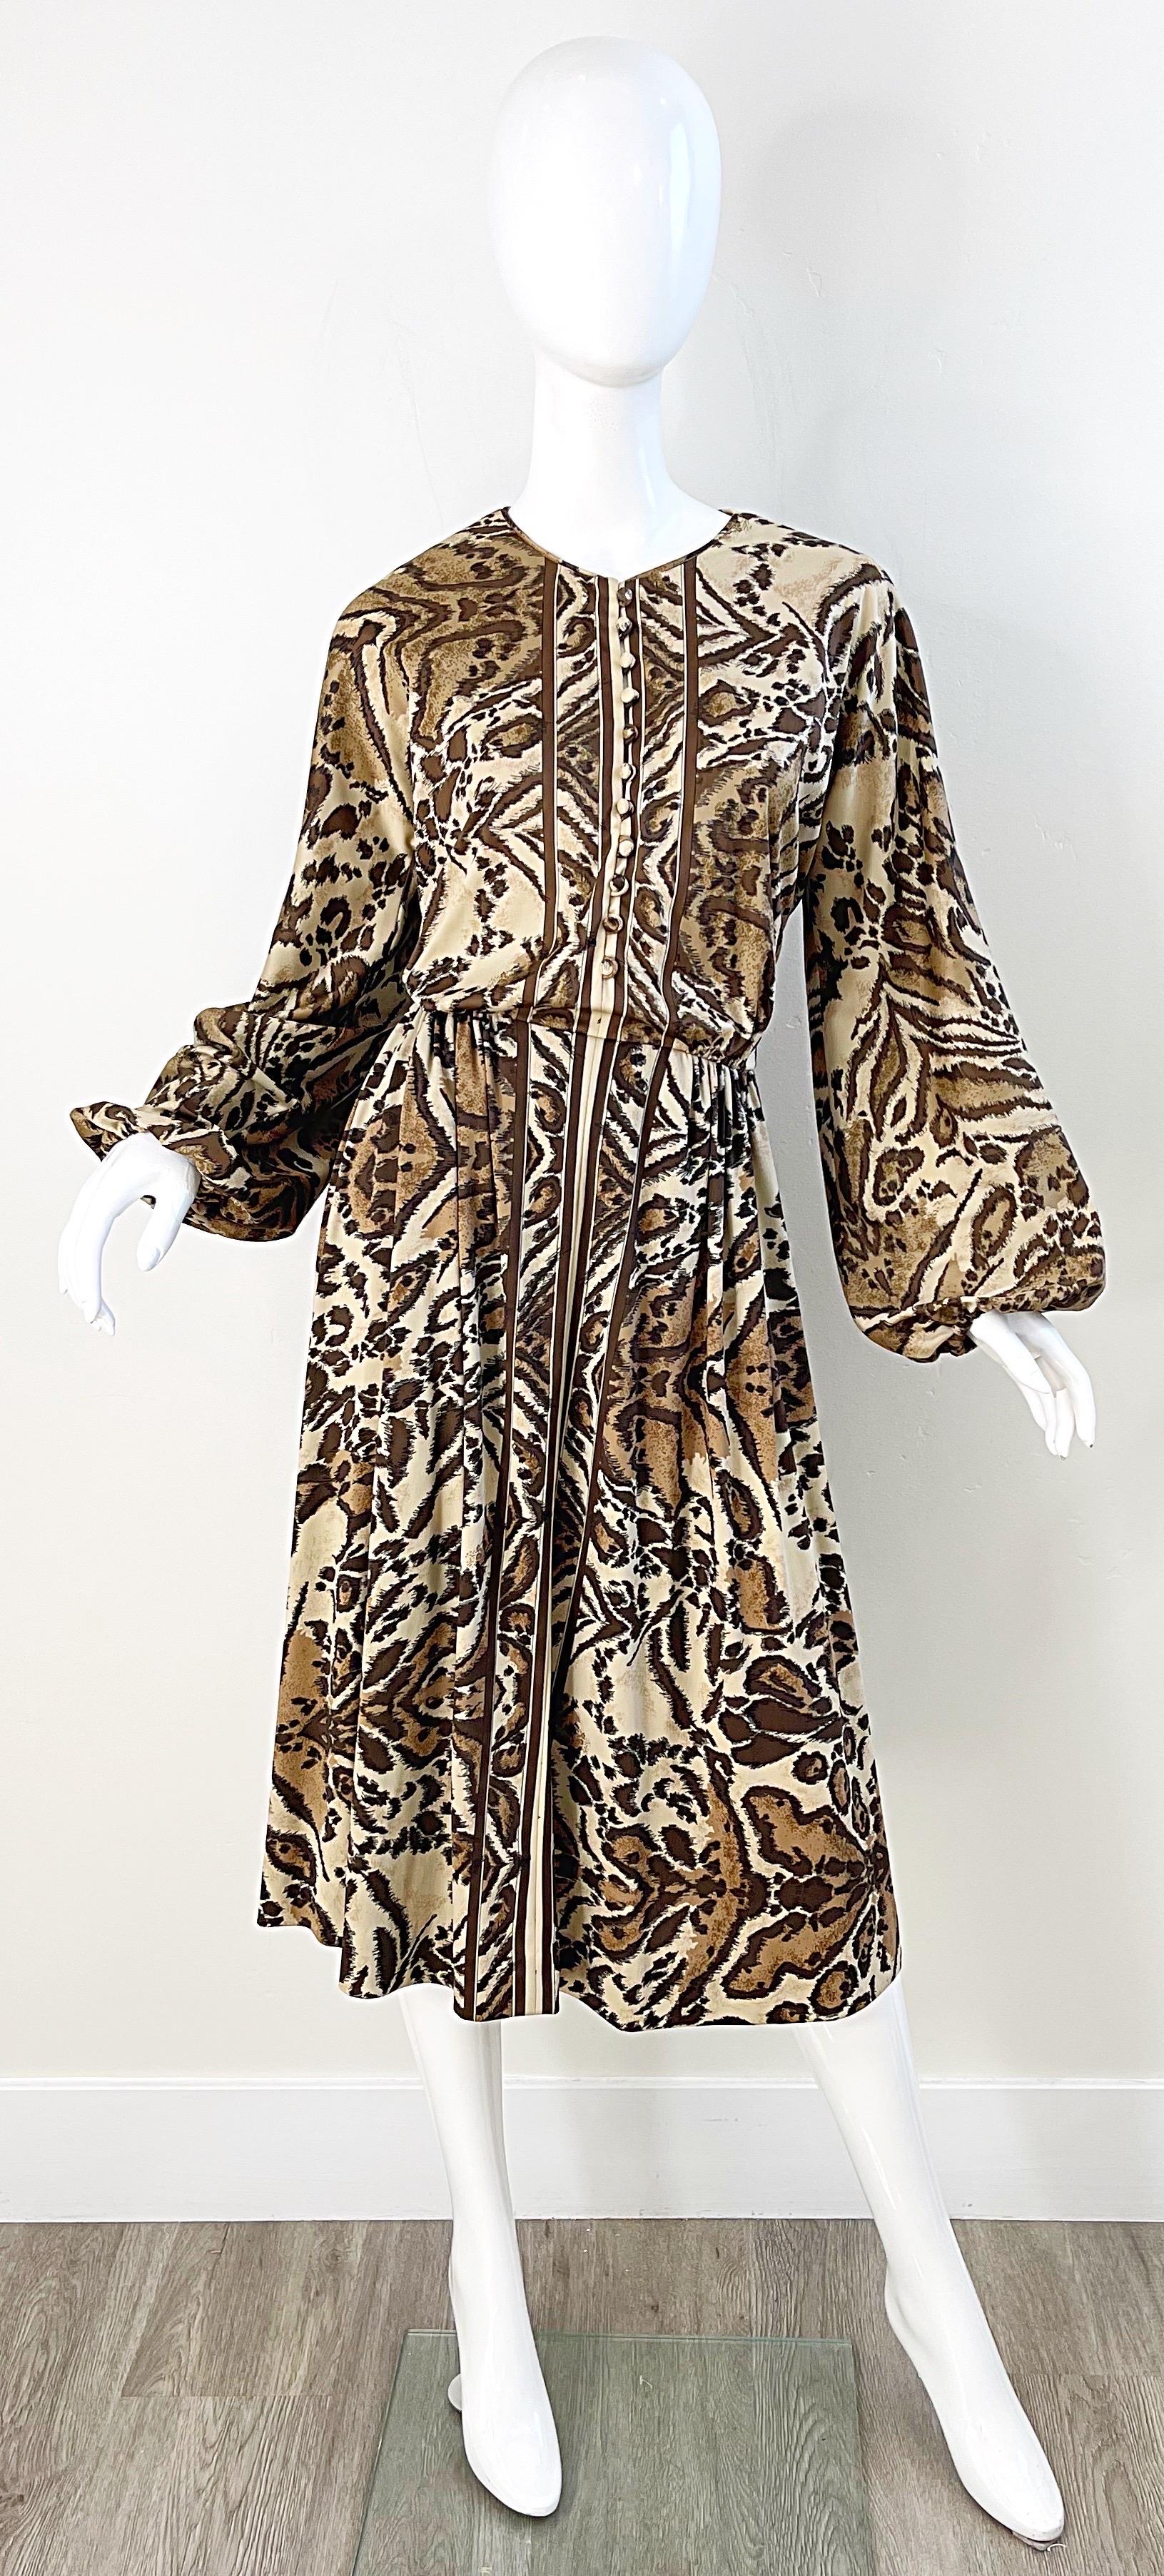 Chic 1970s VICTOR COSTA leopard animal print long bishop sleeve dress ! Fabric covered buttons up the front. Tailored bodice with a flattering and forgiving skirt. POCKETS at each side of the waist. Hidden zipper up the back with hook-and-eye